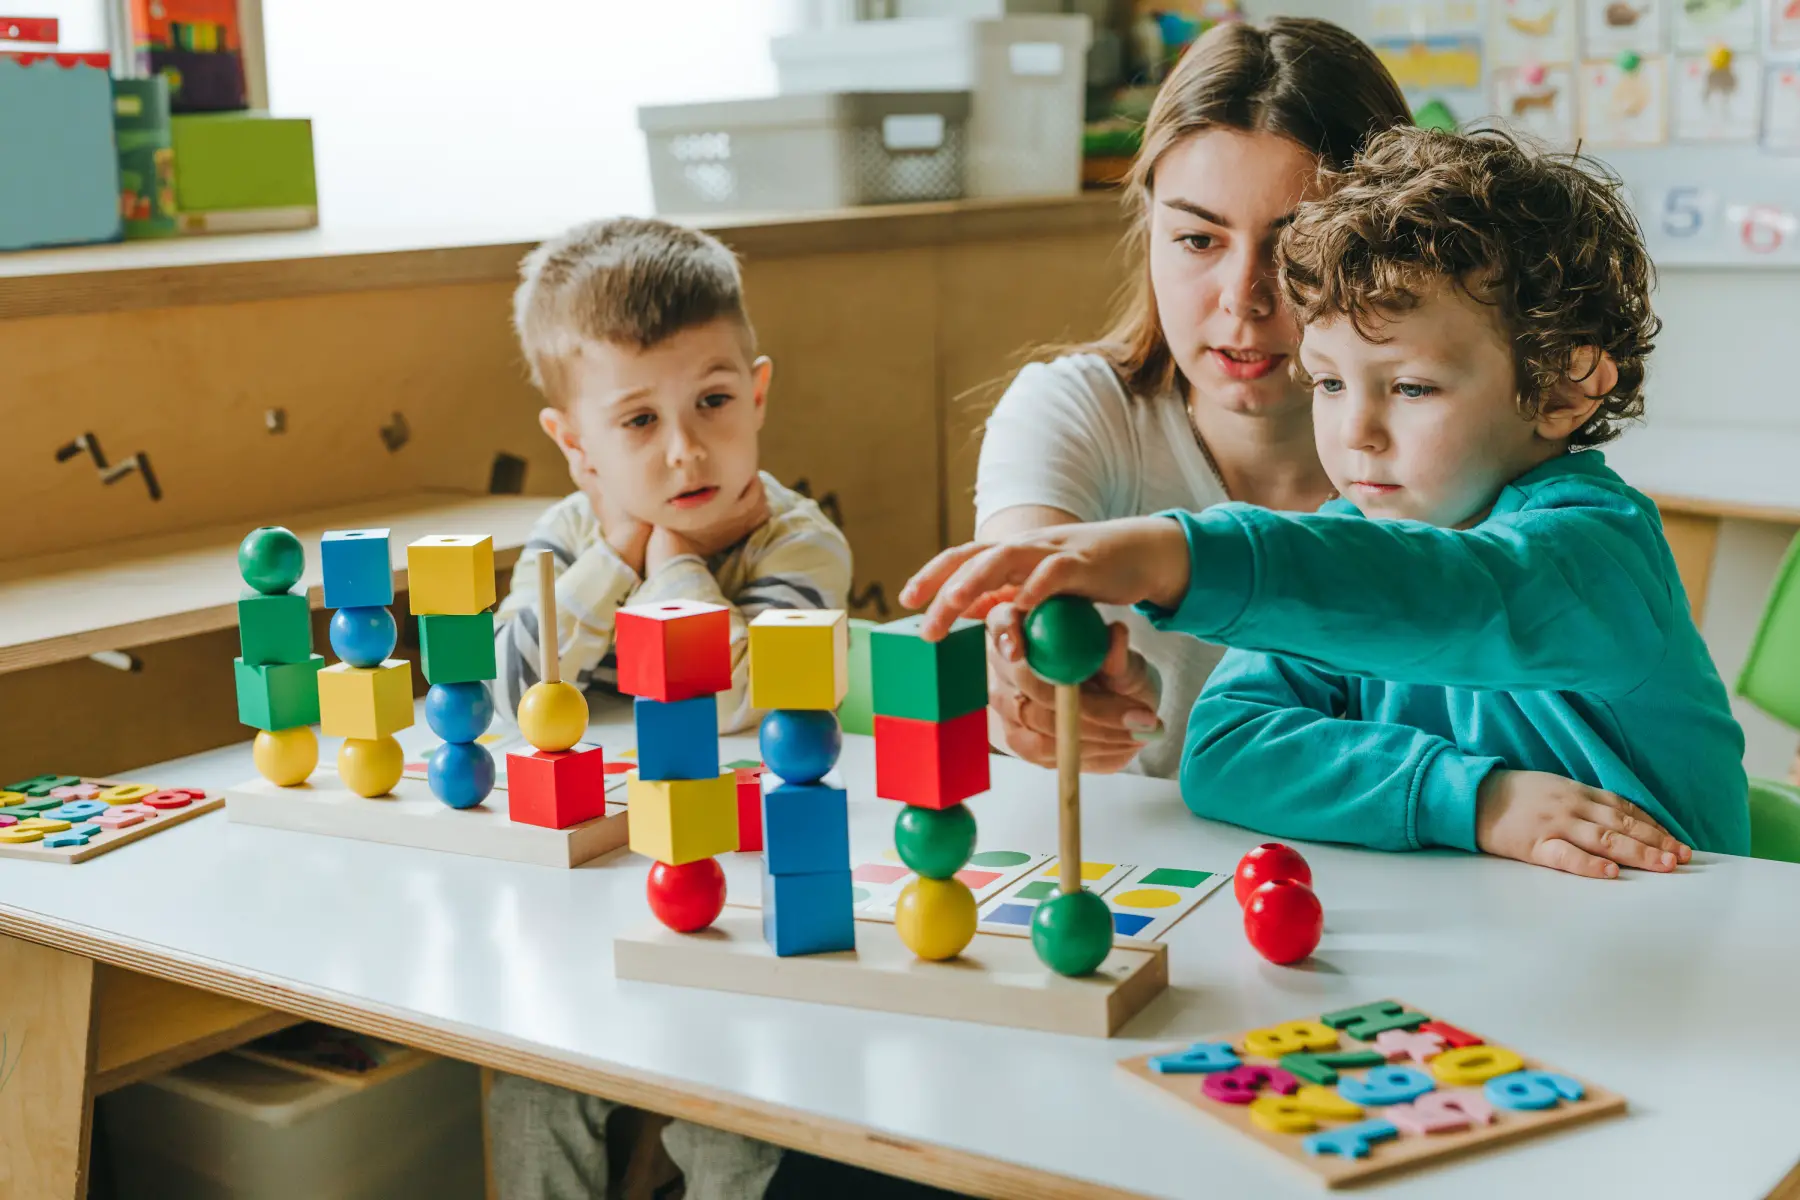 a female teacher helping a little boy sort different colored wooden cubes on his desk in a preschool classroom setting